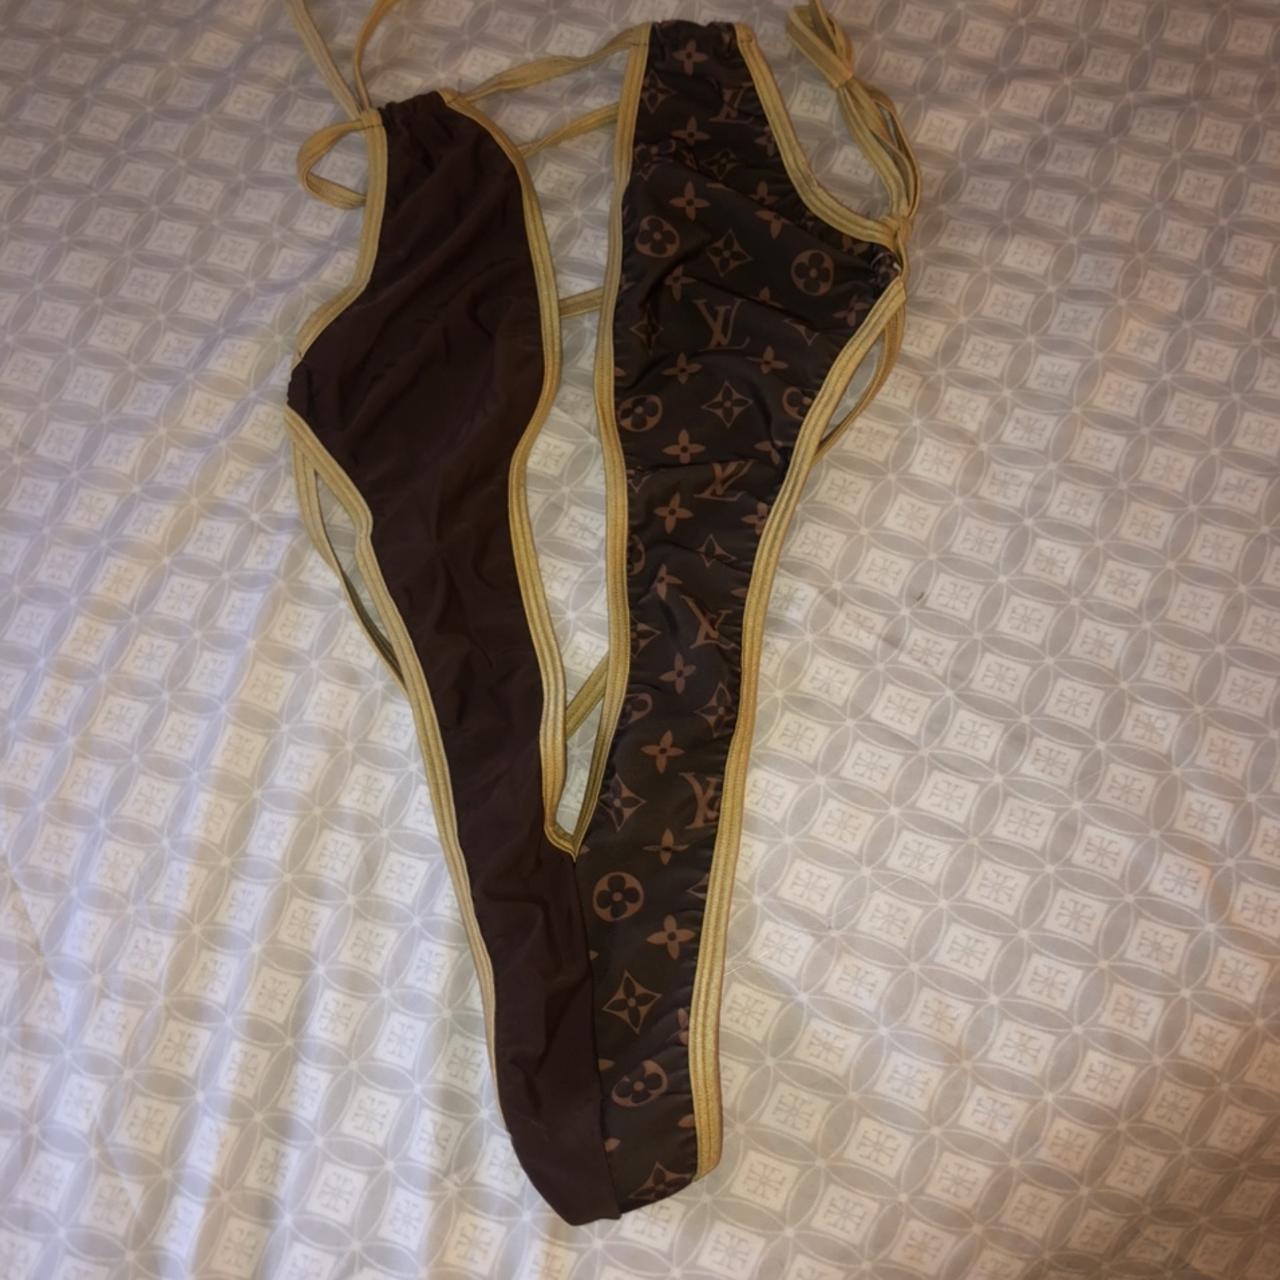 Lv inspired exotic dance wear outfit. No flaws, can - Depop